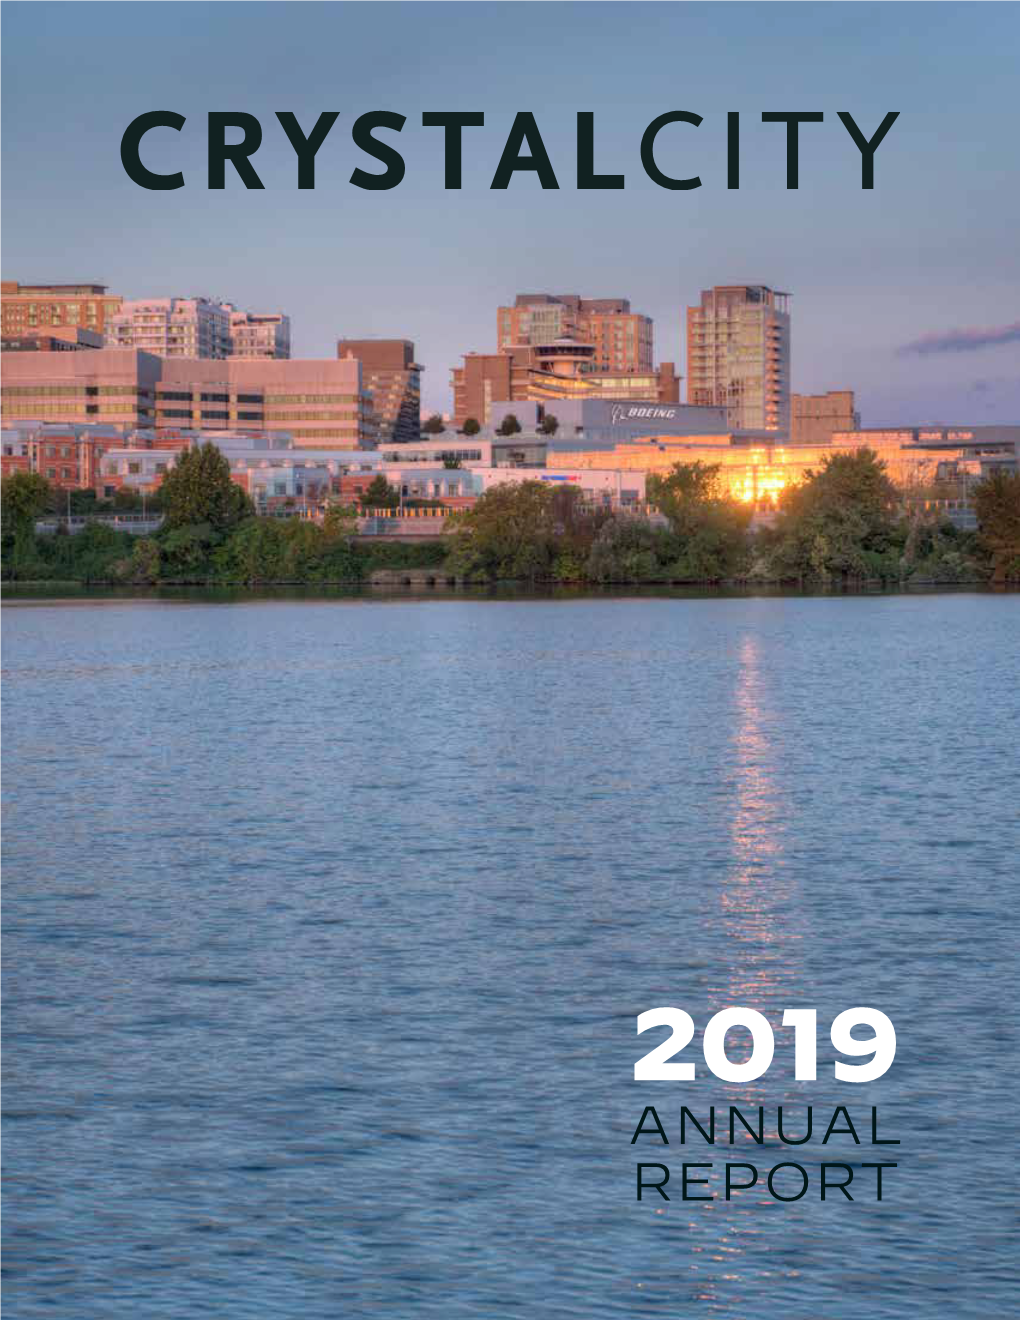 Fiscal Year 2019 Annual Report